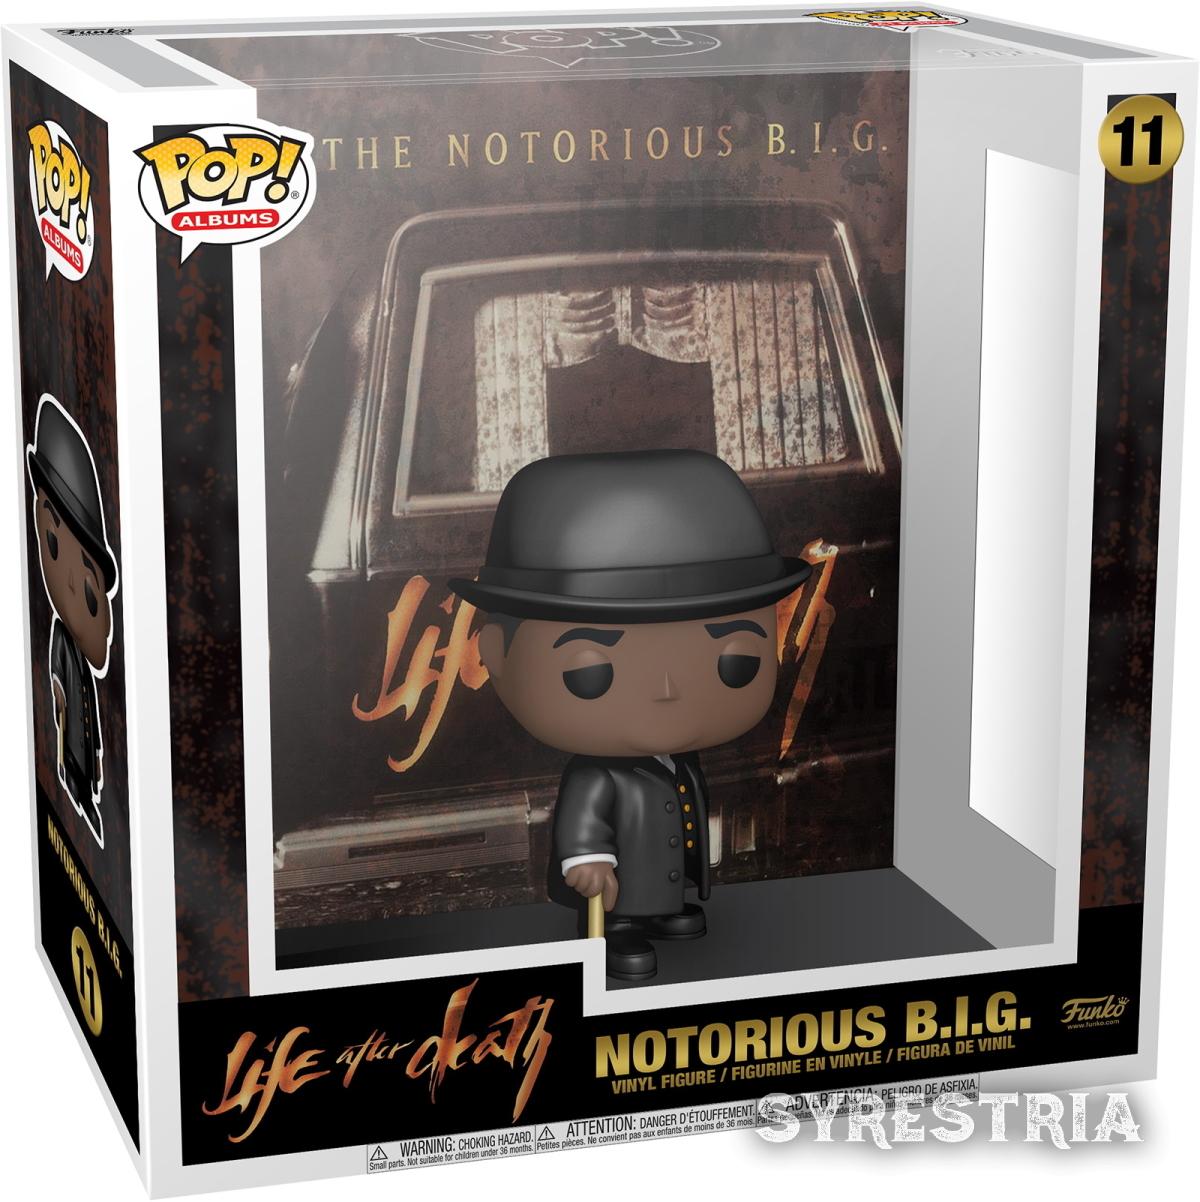 The Notorious B.I.G. - Notorious B.I.G. Life After Death 11 - Funko Pop! Albums - Vinyl Figur